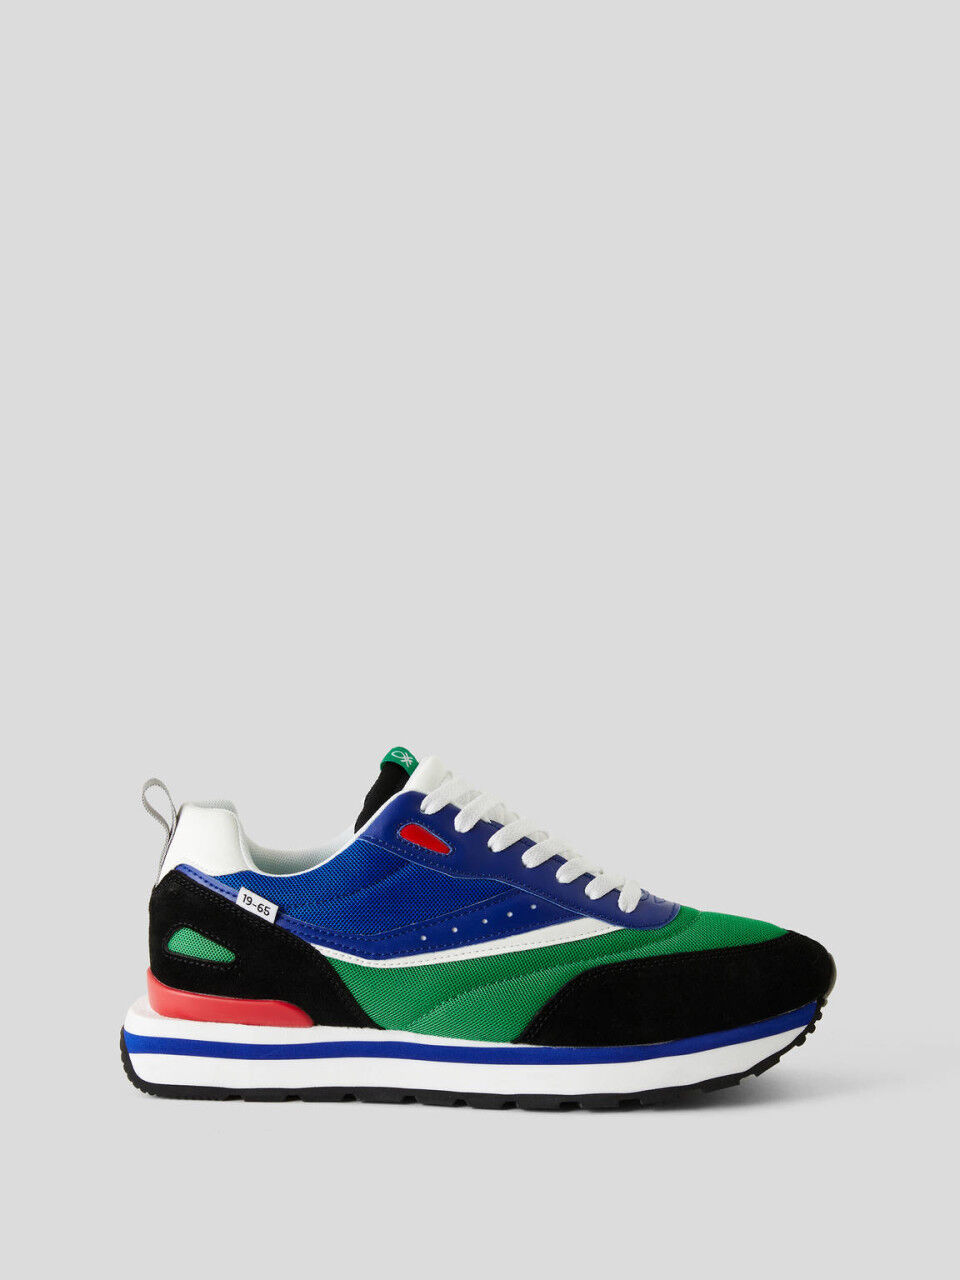 Men's Shoes New Collection 2021 | Benetton